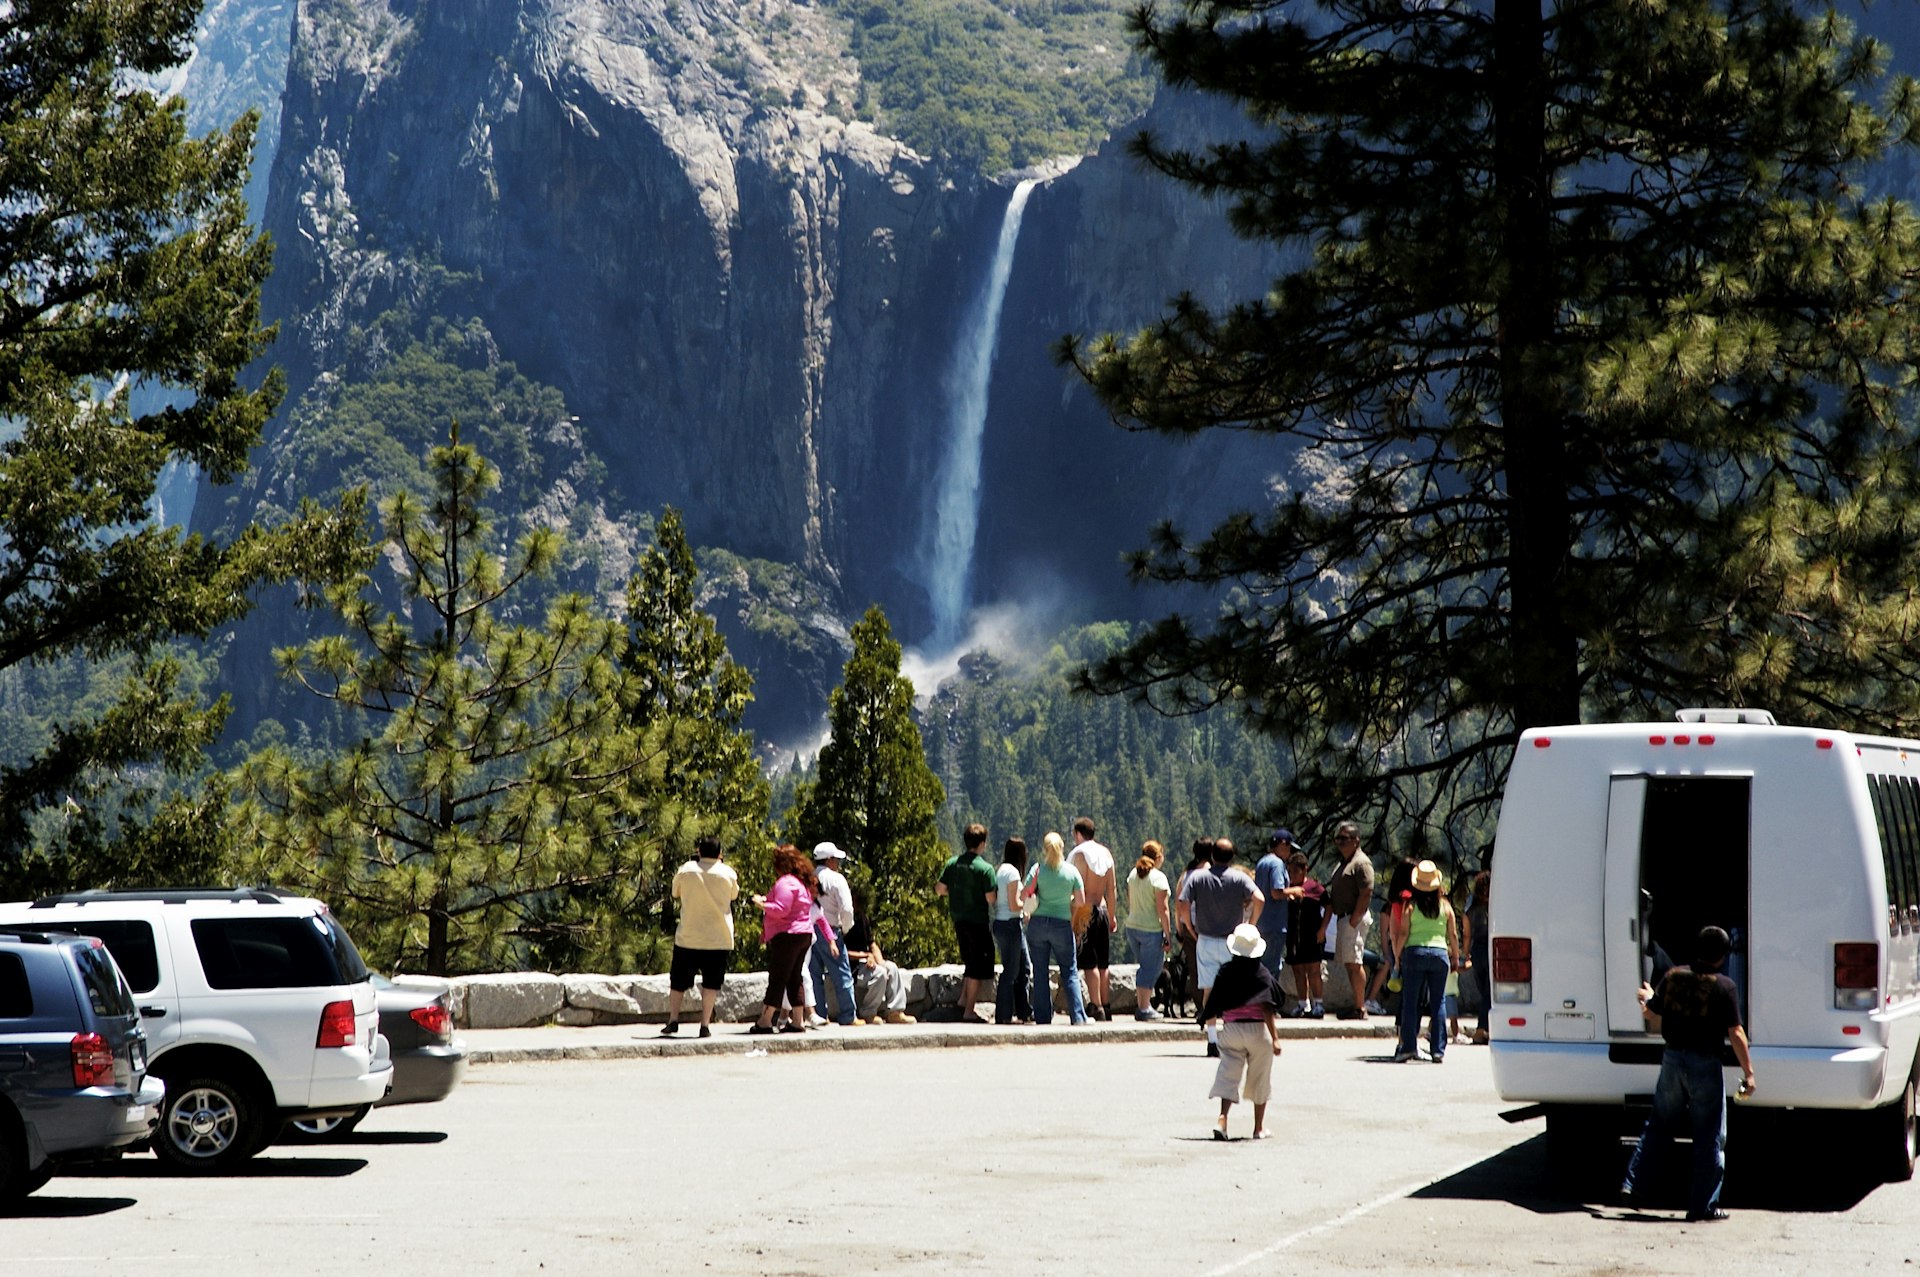 The Yosemite Valley Overlook with summer crowds